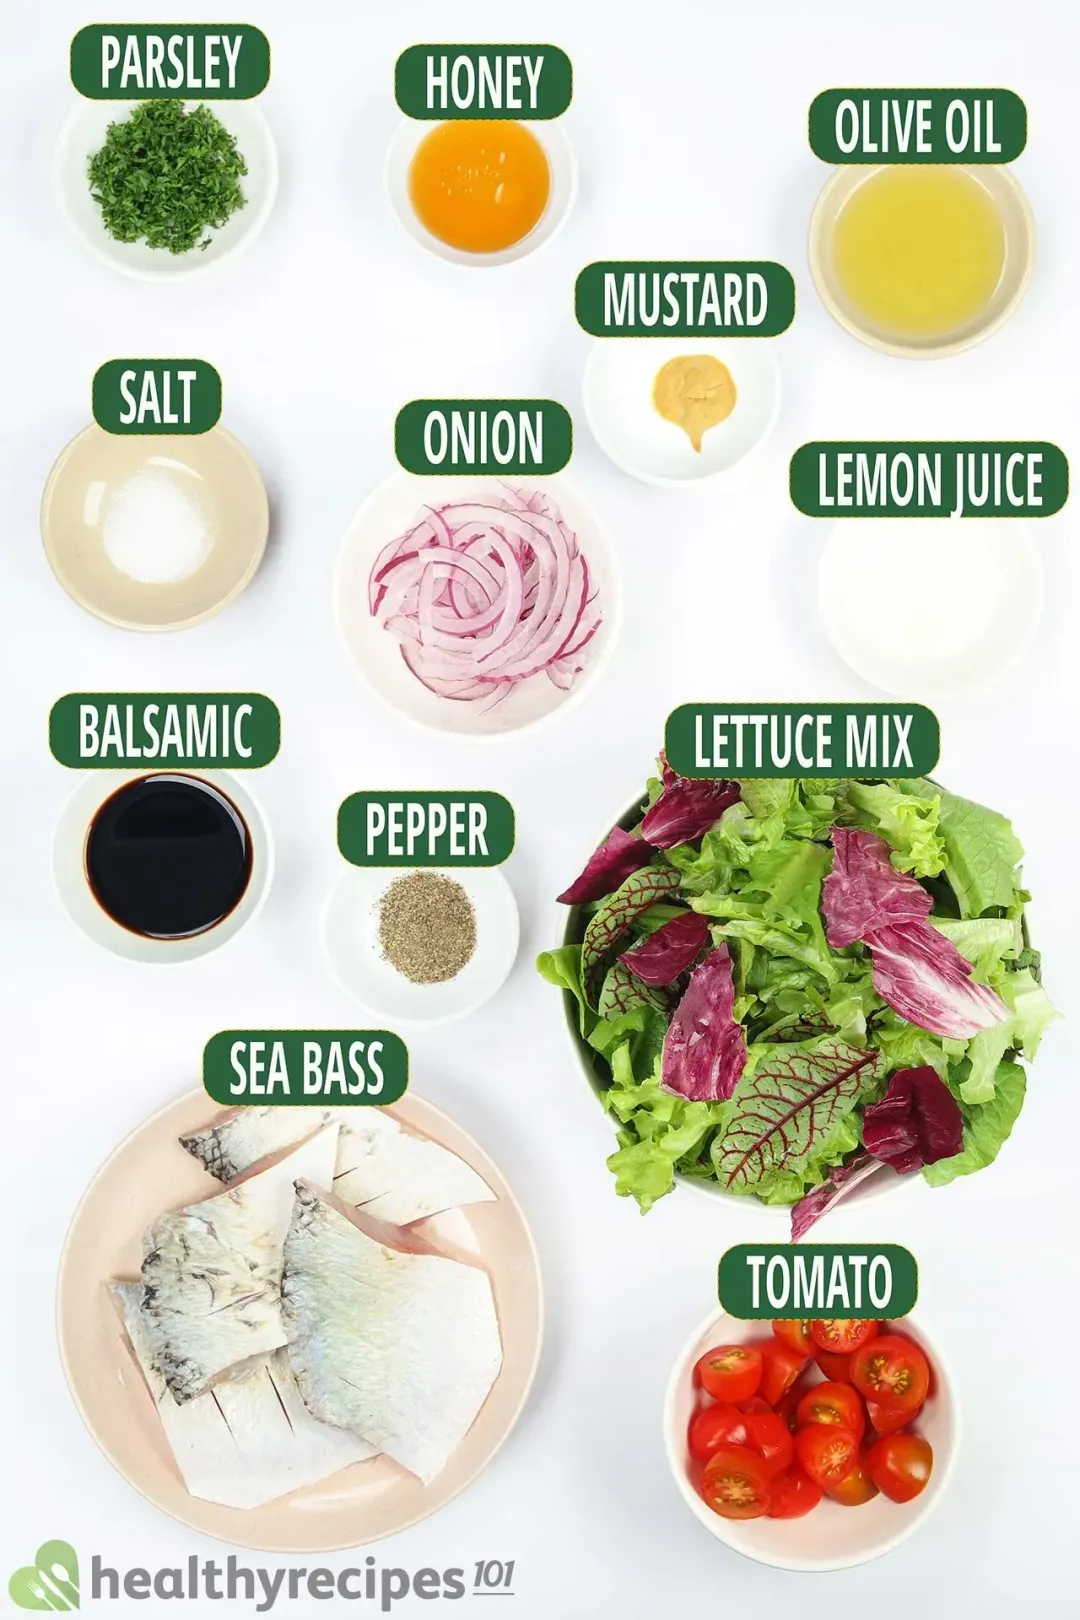 Ingredients for Sea Bass Salad